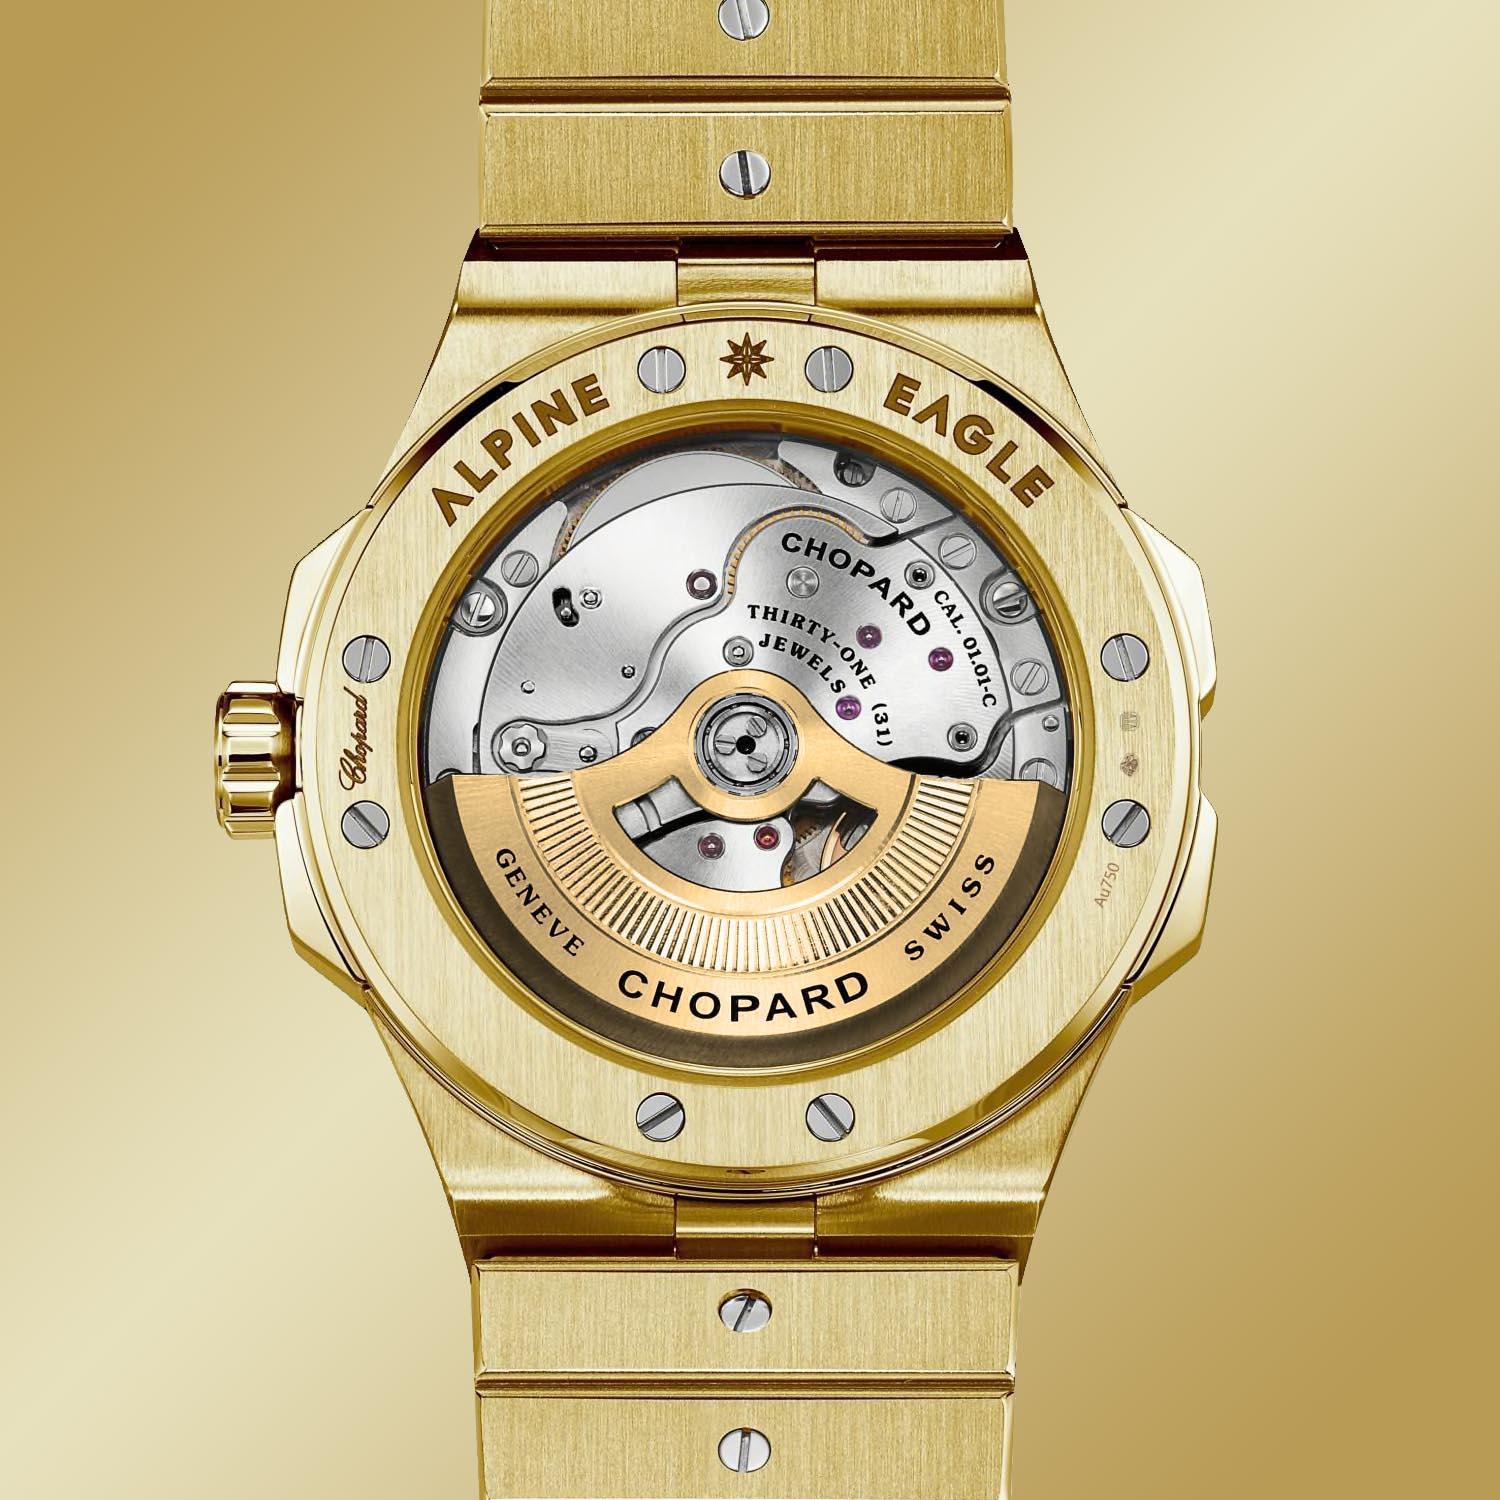 Chopard Alpine Eagle 41 Full Ethical Yellow Gold 295363 0001 9